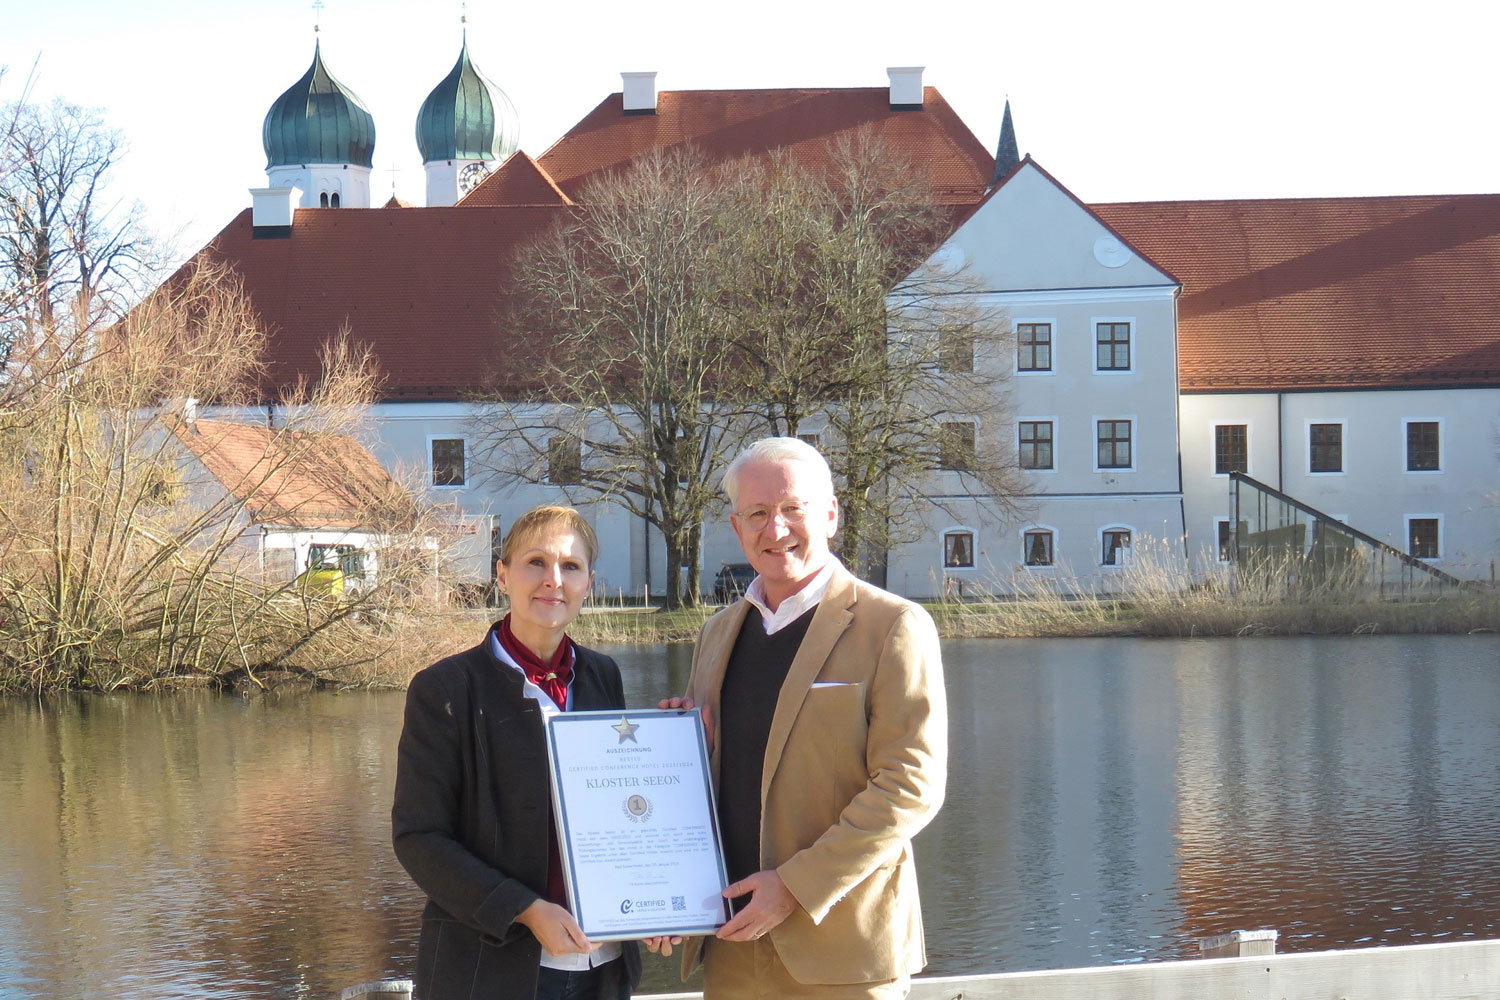 Star Award“: Kloster Seeon bestes Tagungshotel - CIMunity: Conference & Incentive Management - A European Magazine for the Meetings Industry